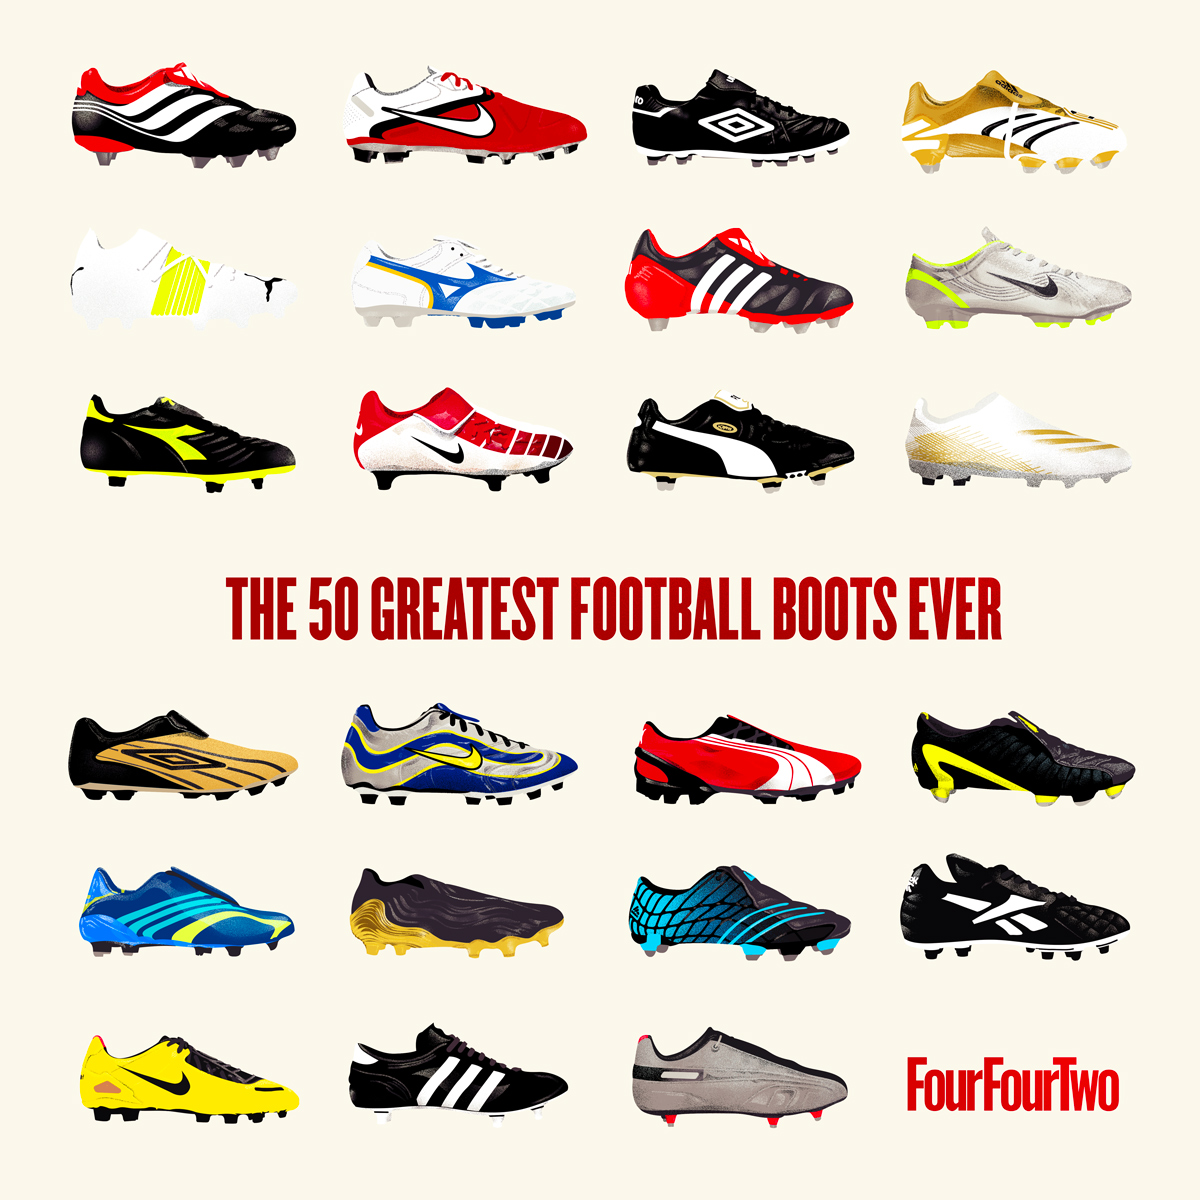 Activamente persona que practica jogging convergencia RANKED! The 50 best football boots ever | FourFourTwo